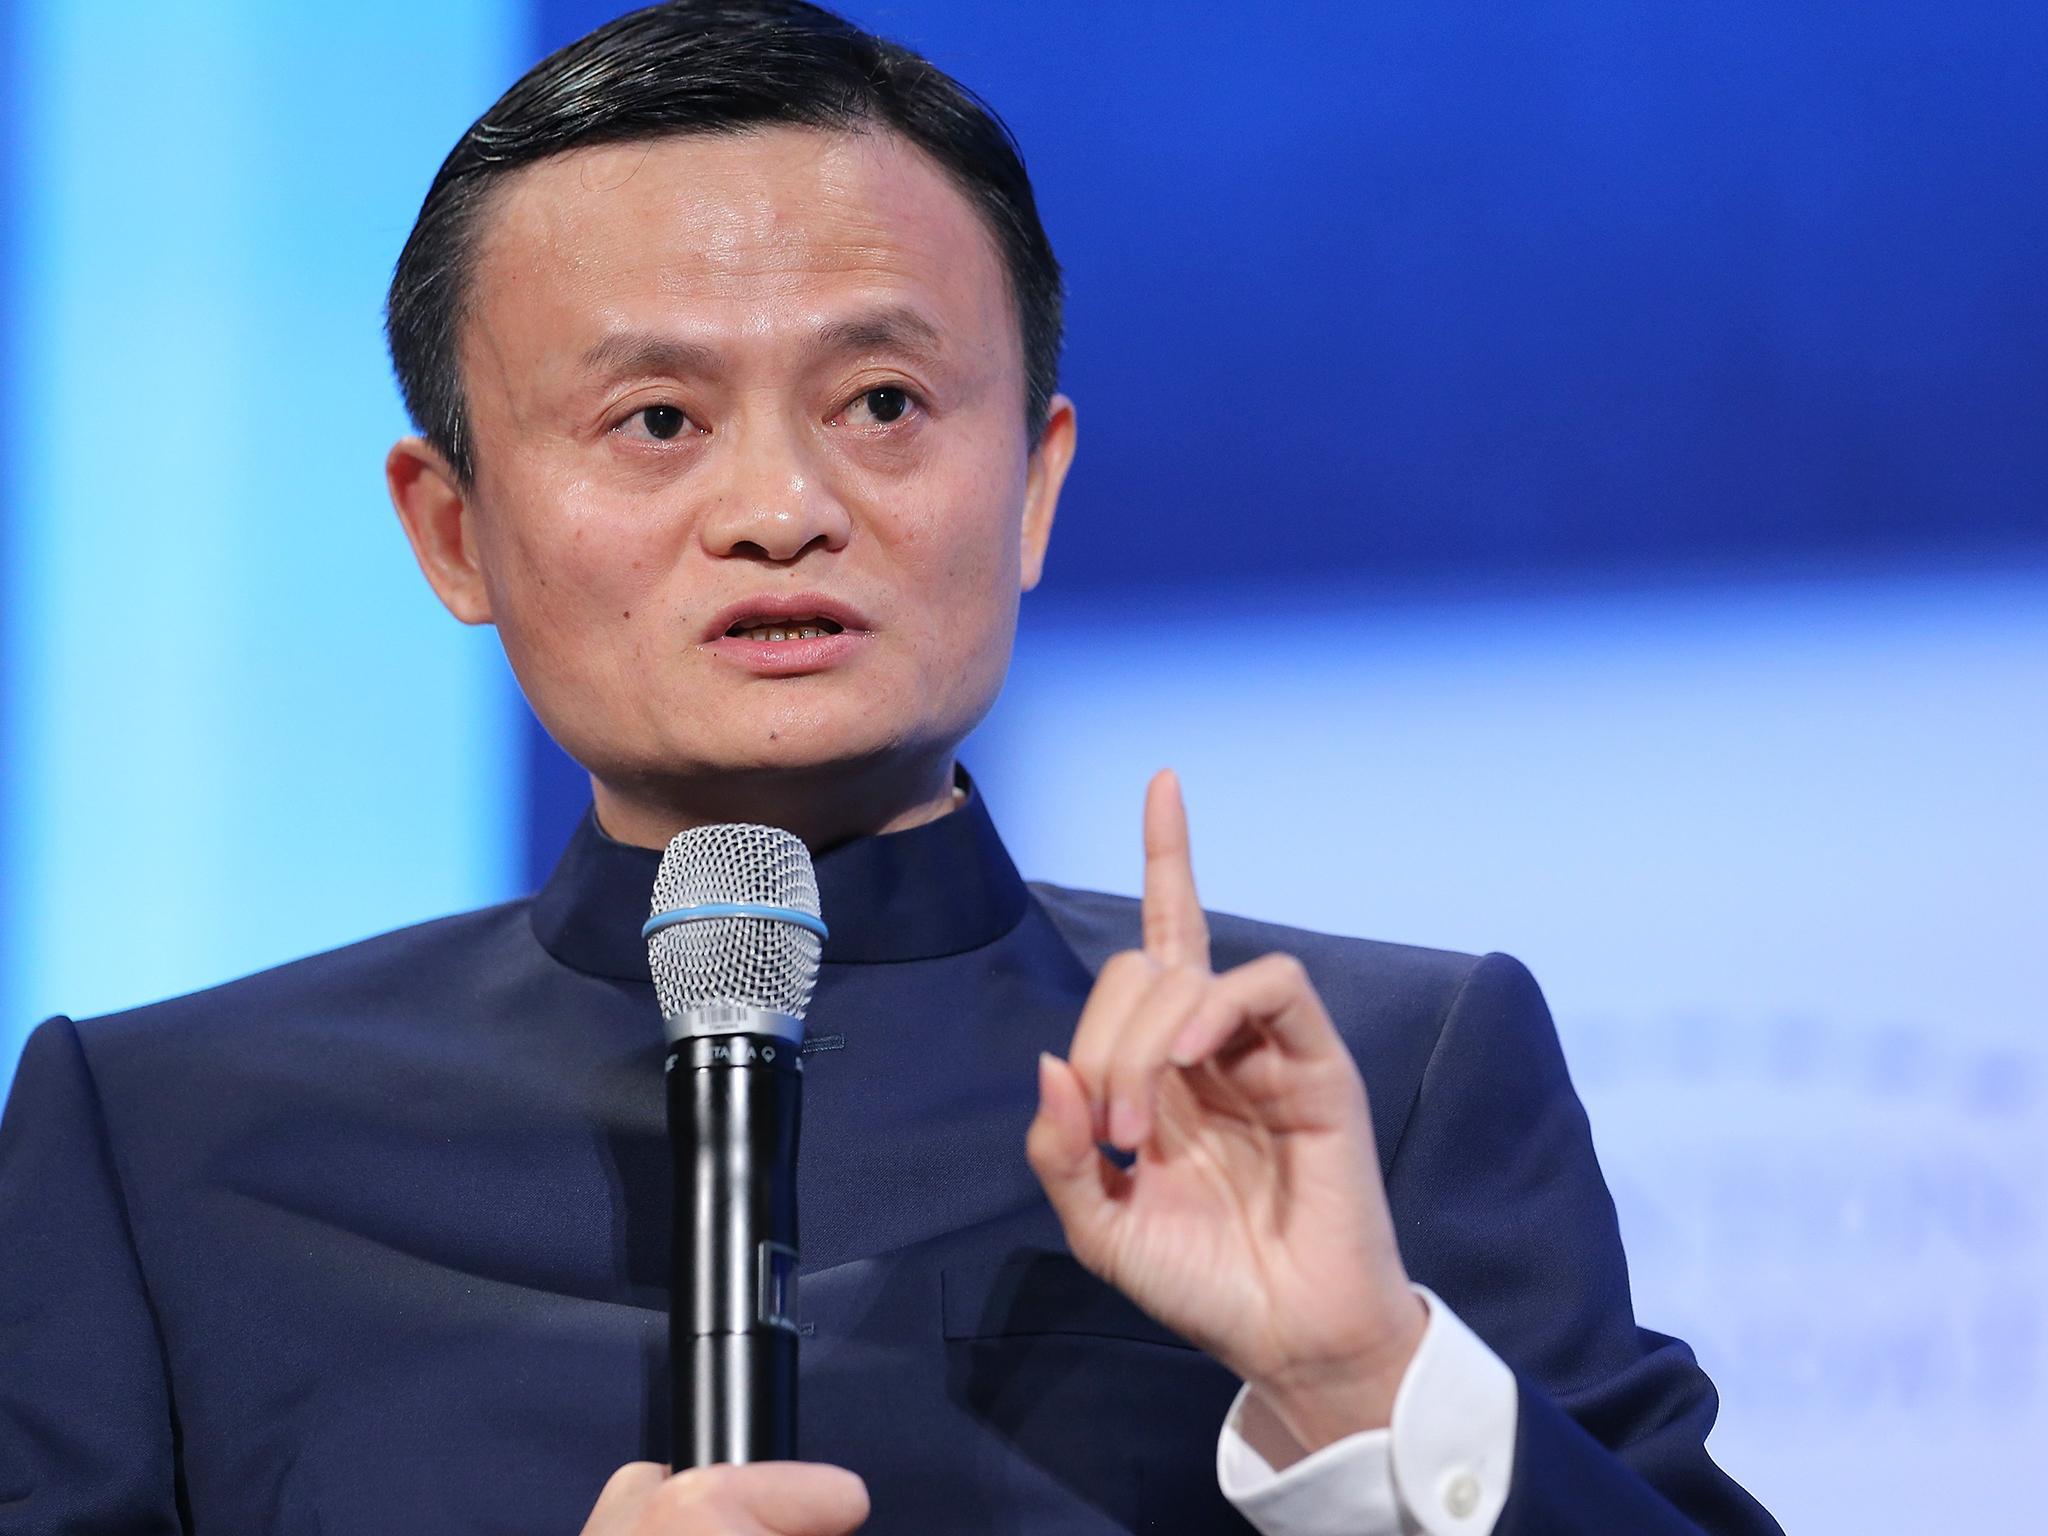 Alibaba’s downward spiral started after its founder Jack Ma’s controversial speech in October 2020&nbsp;